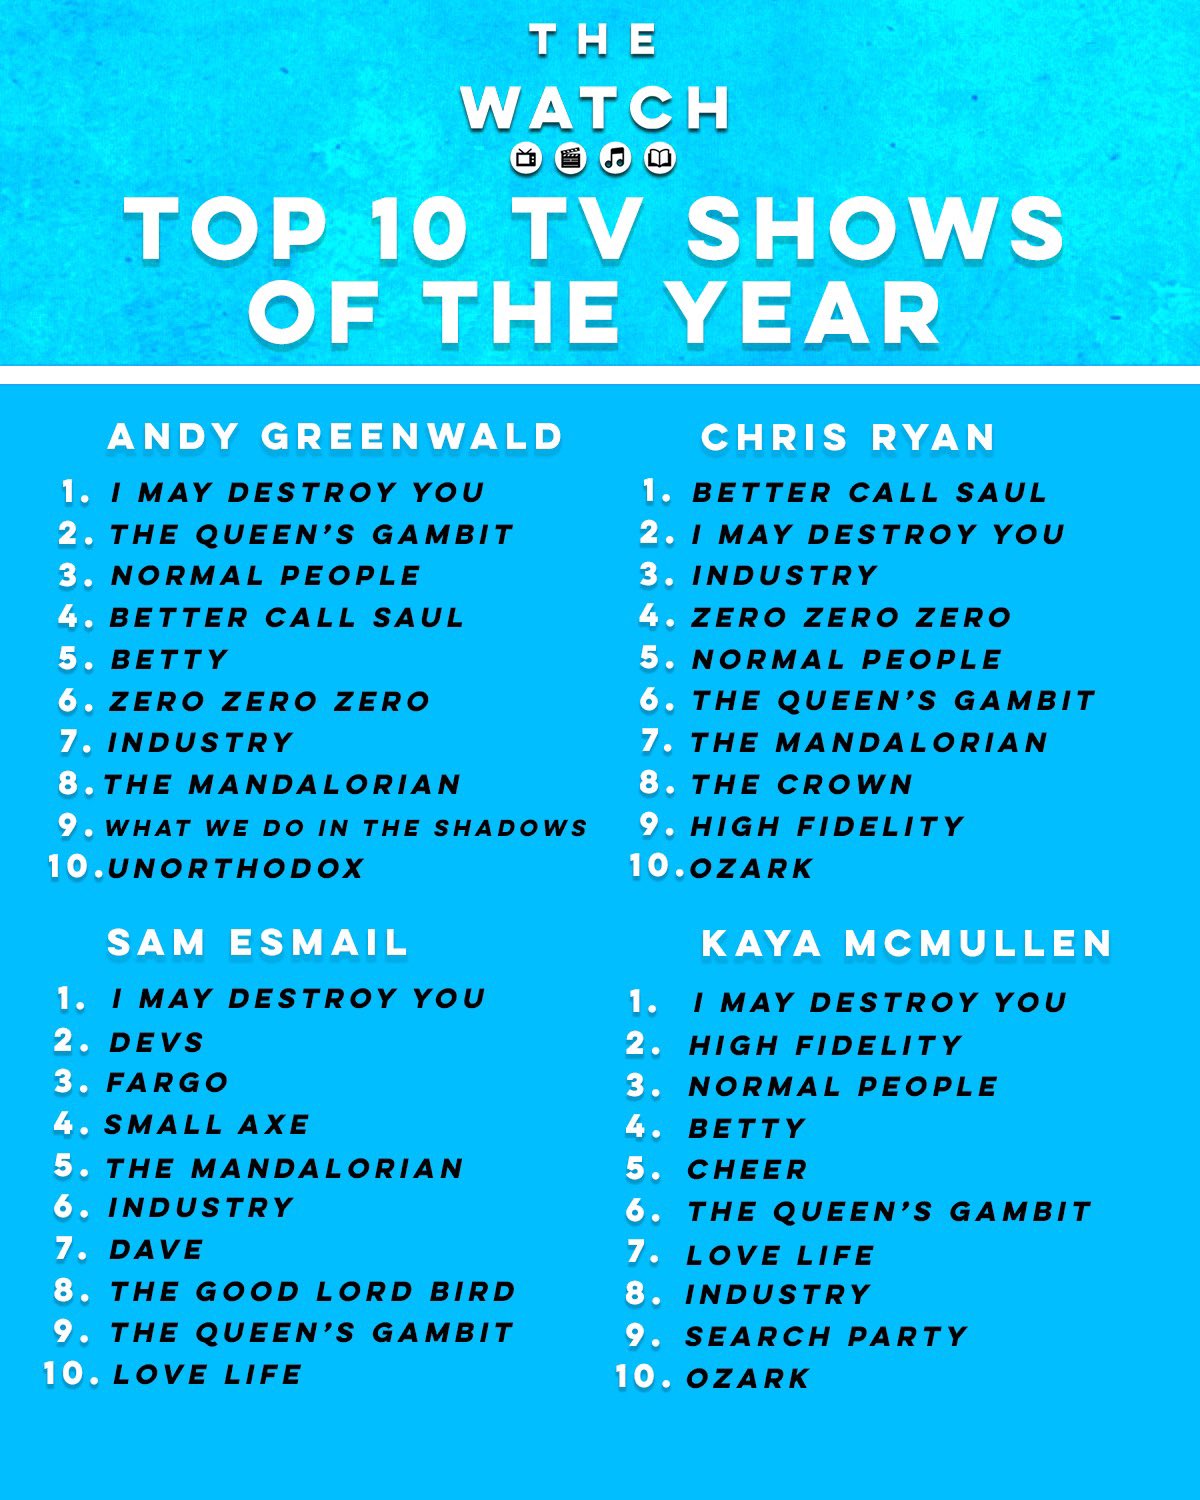 Langt væk ophøre chef The Watch on Twitter: "If you're looking for the full list of our top 10 TV  shows of the year, here it is: https://t.co/ZSz2F54HUL" / Twitter